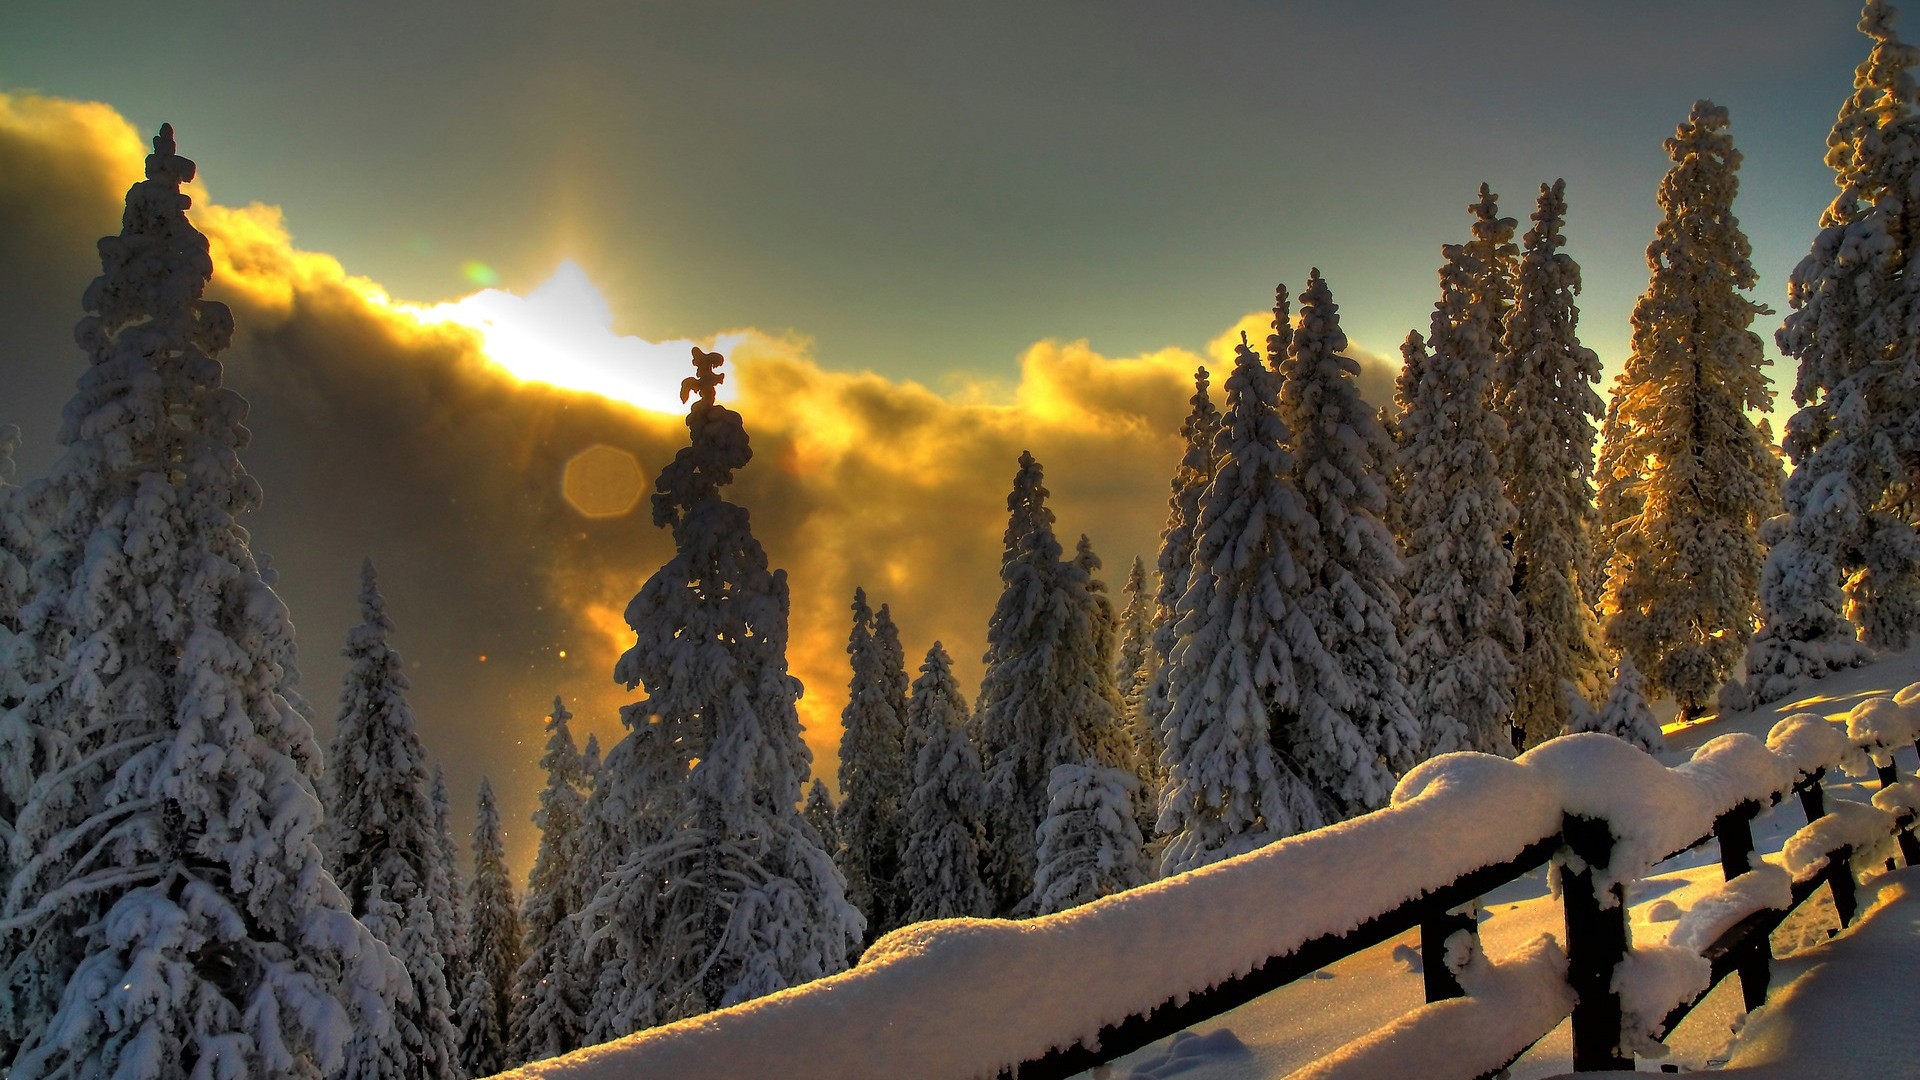 General 1920x1080 landscape winter snow sunset trees fence cold nature sky sunlight outdoors China